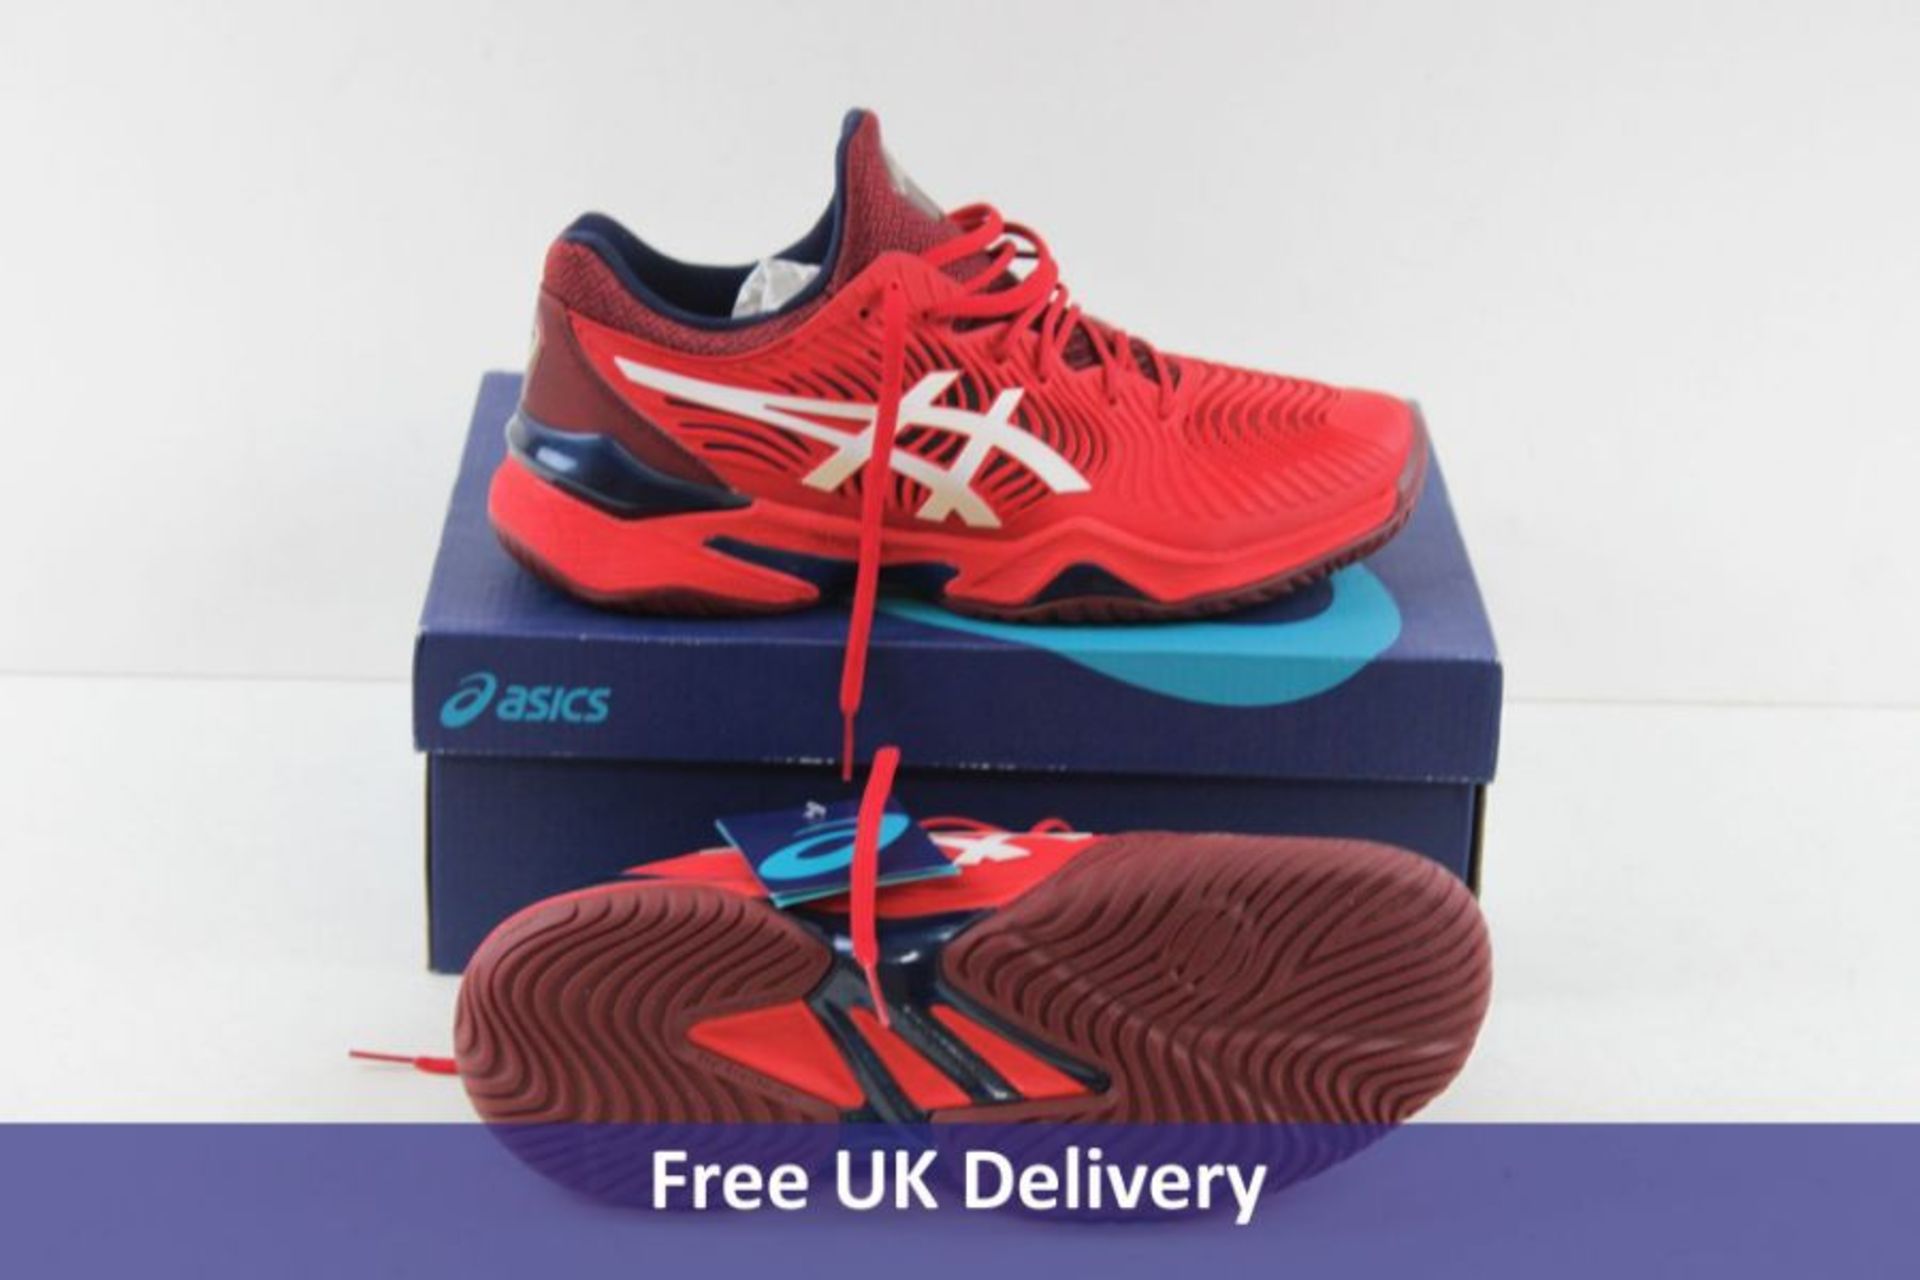 Asics Men's Court FF 2 Trainers, Classic Red and White, UK 8.5